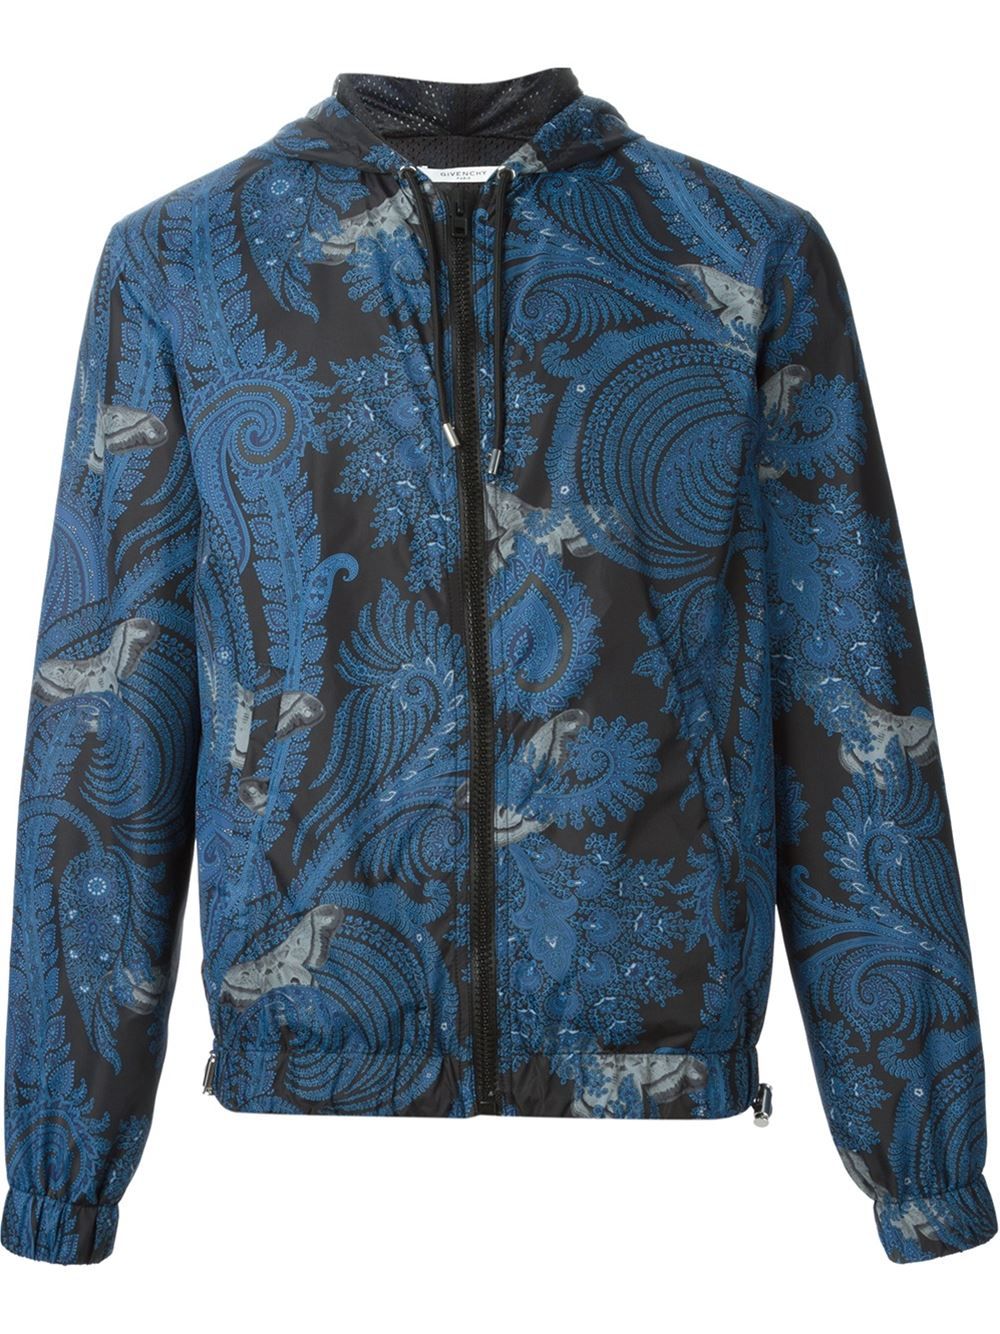 Givenchy Paisley Print Windbreaker Jacket in Blue for Men | Lyst